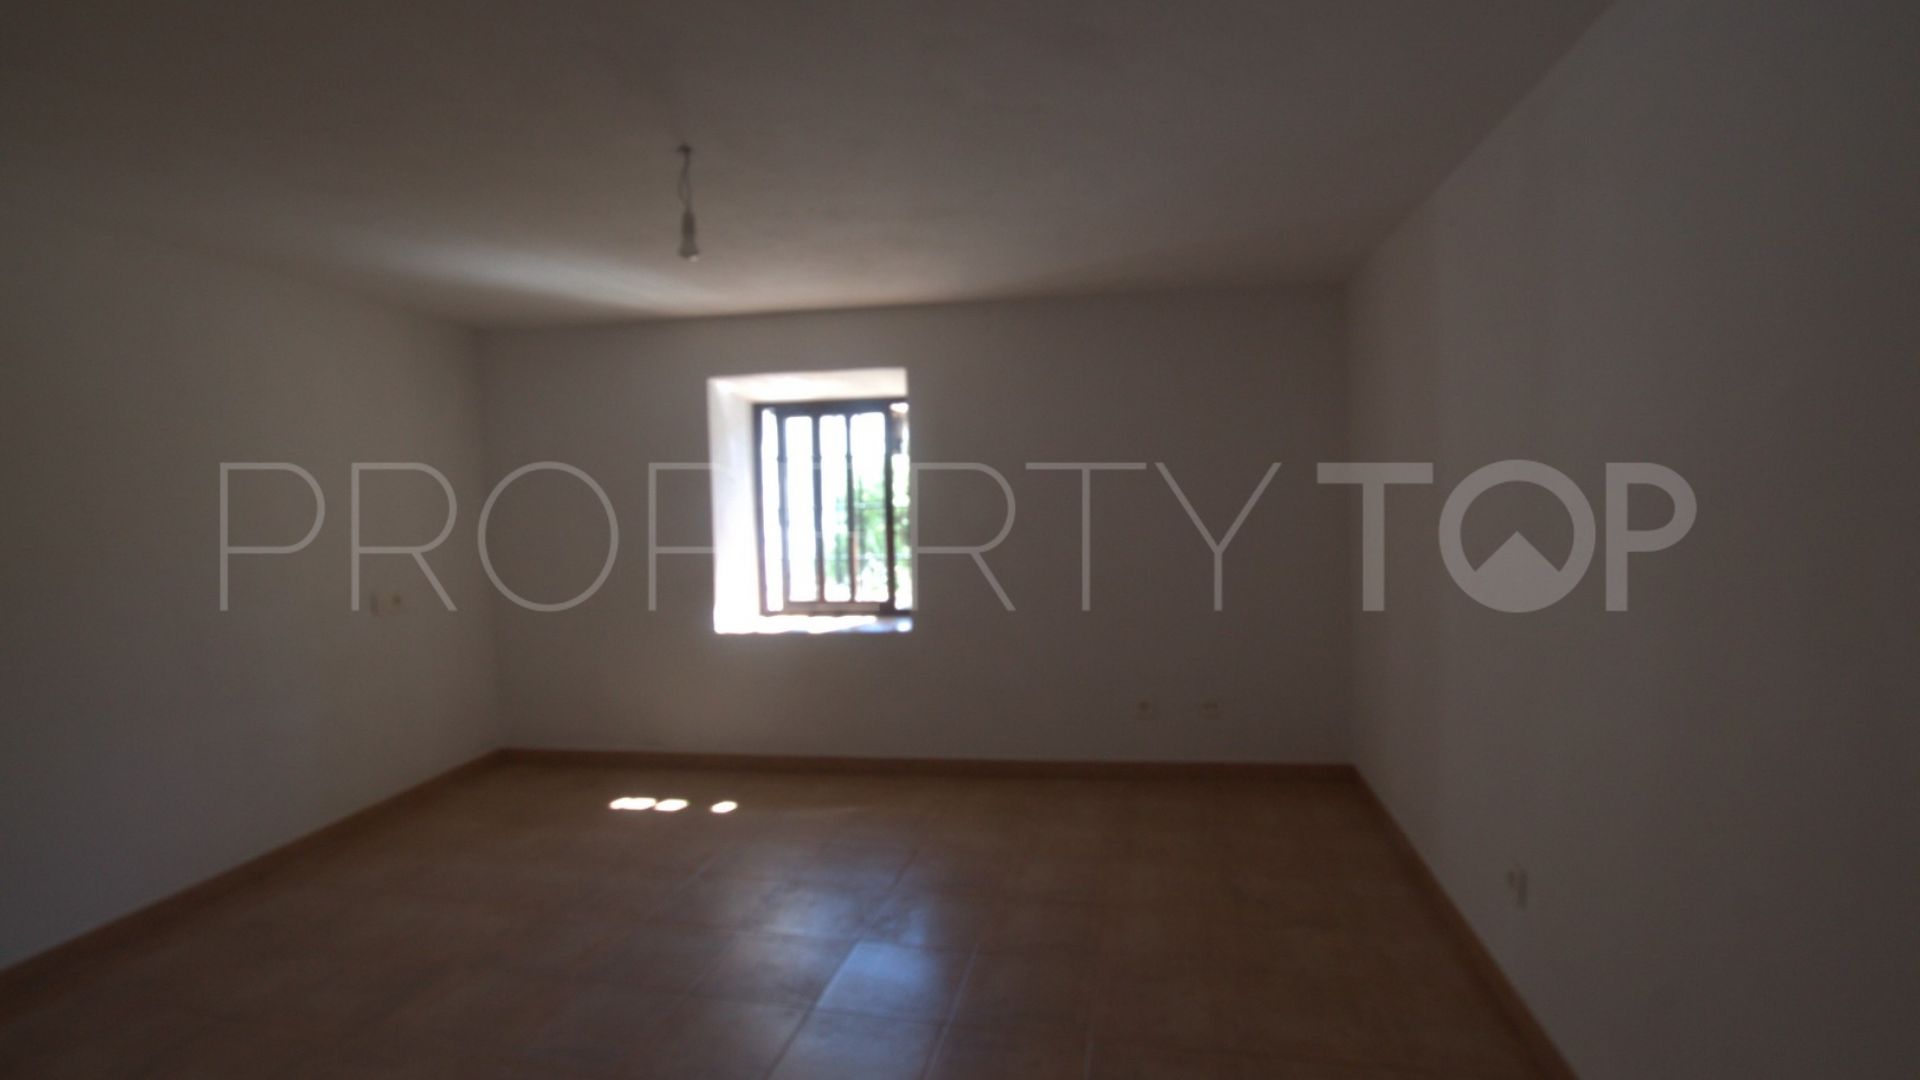 For sale house in Pueblo with 3 bedrooms